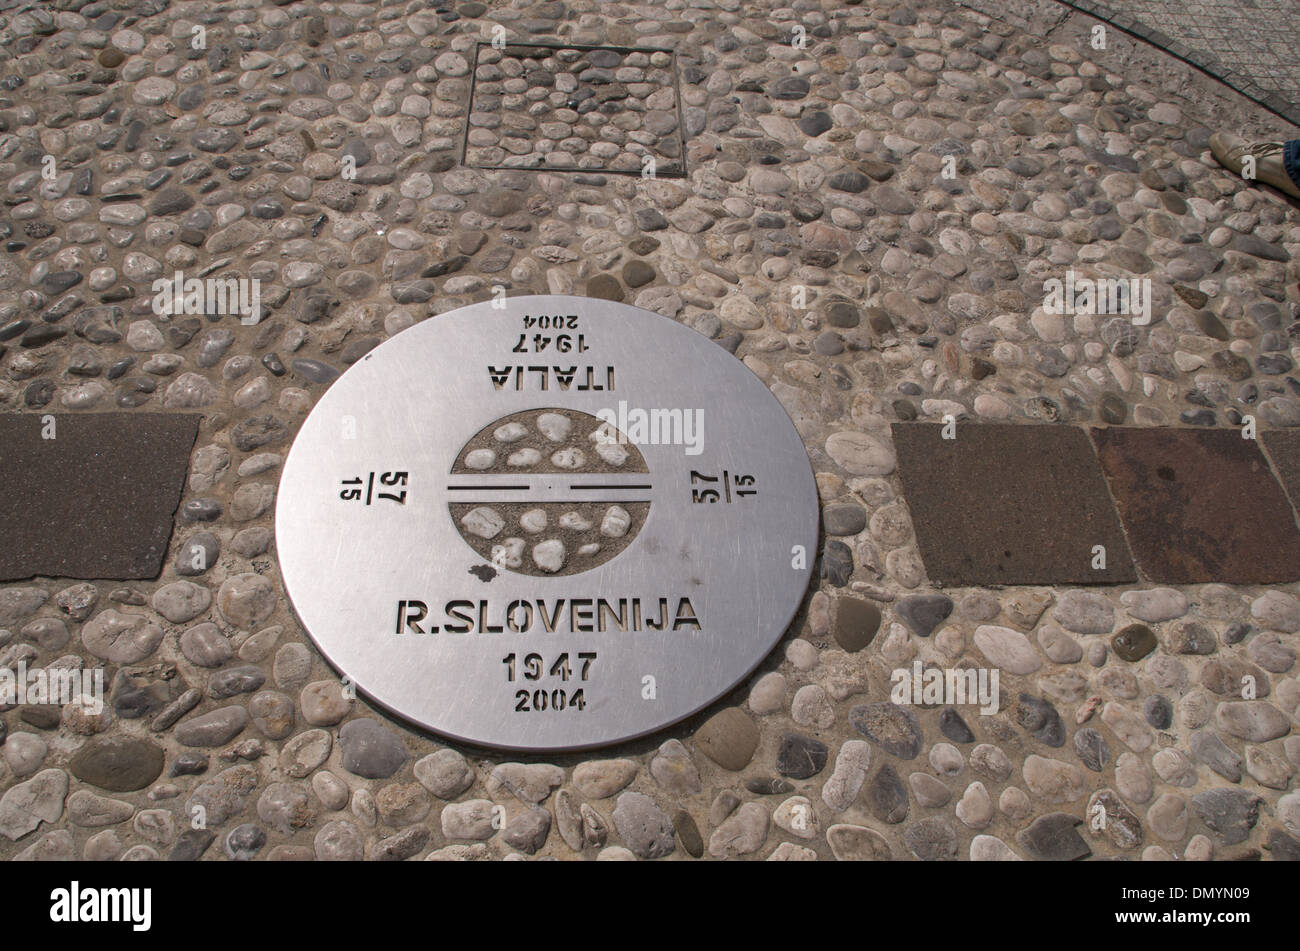 Plaque marking the border between Italy and Slovenia, in the town of Gorizia. The border runs right through the middle. Stock Photo